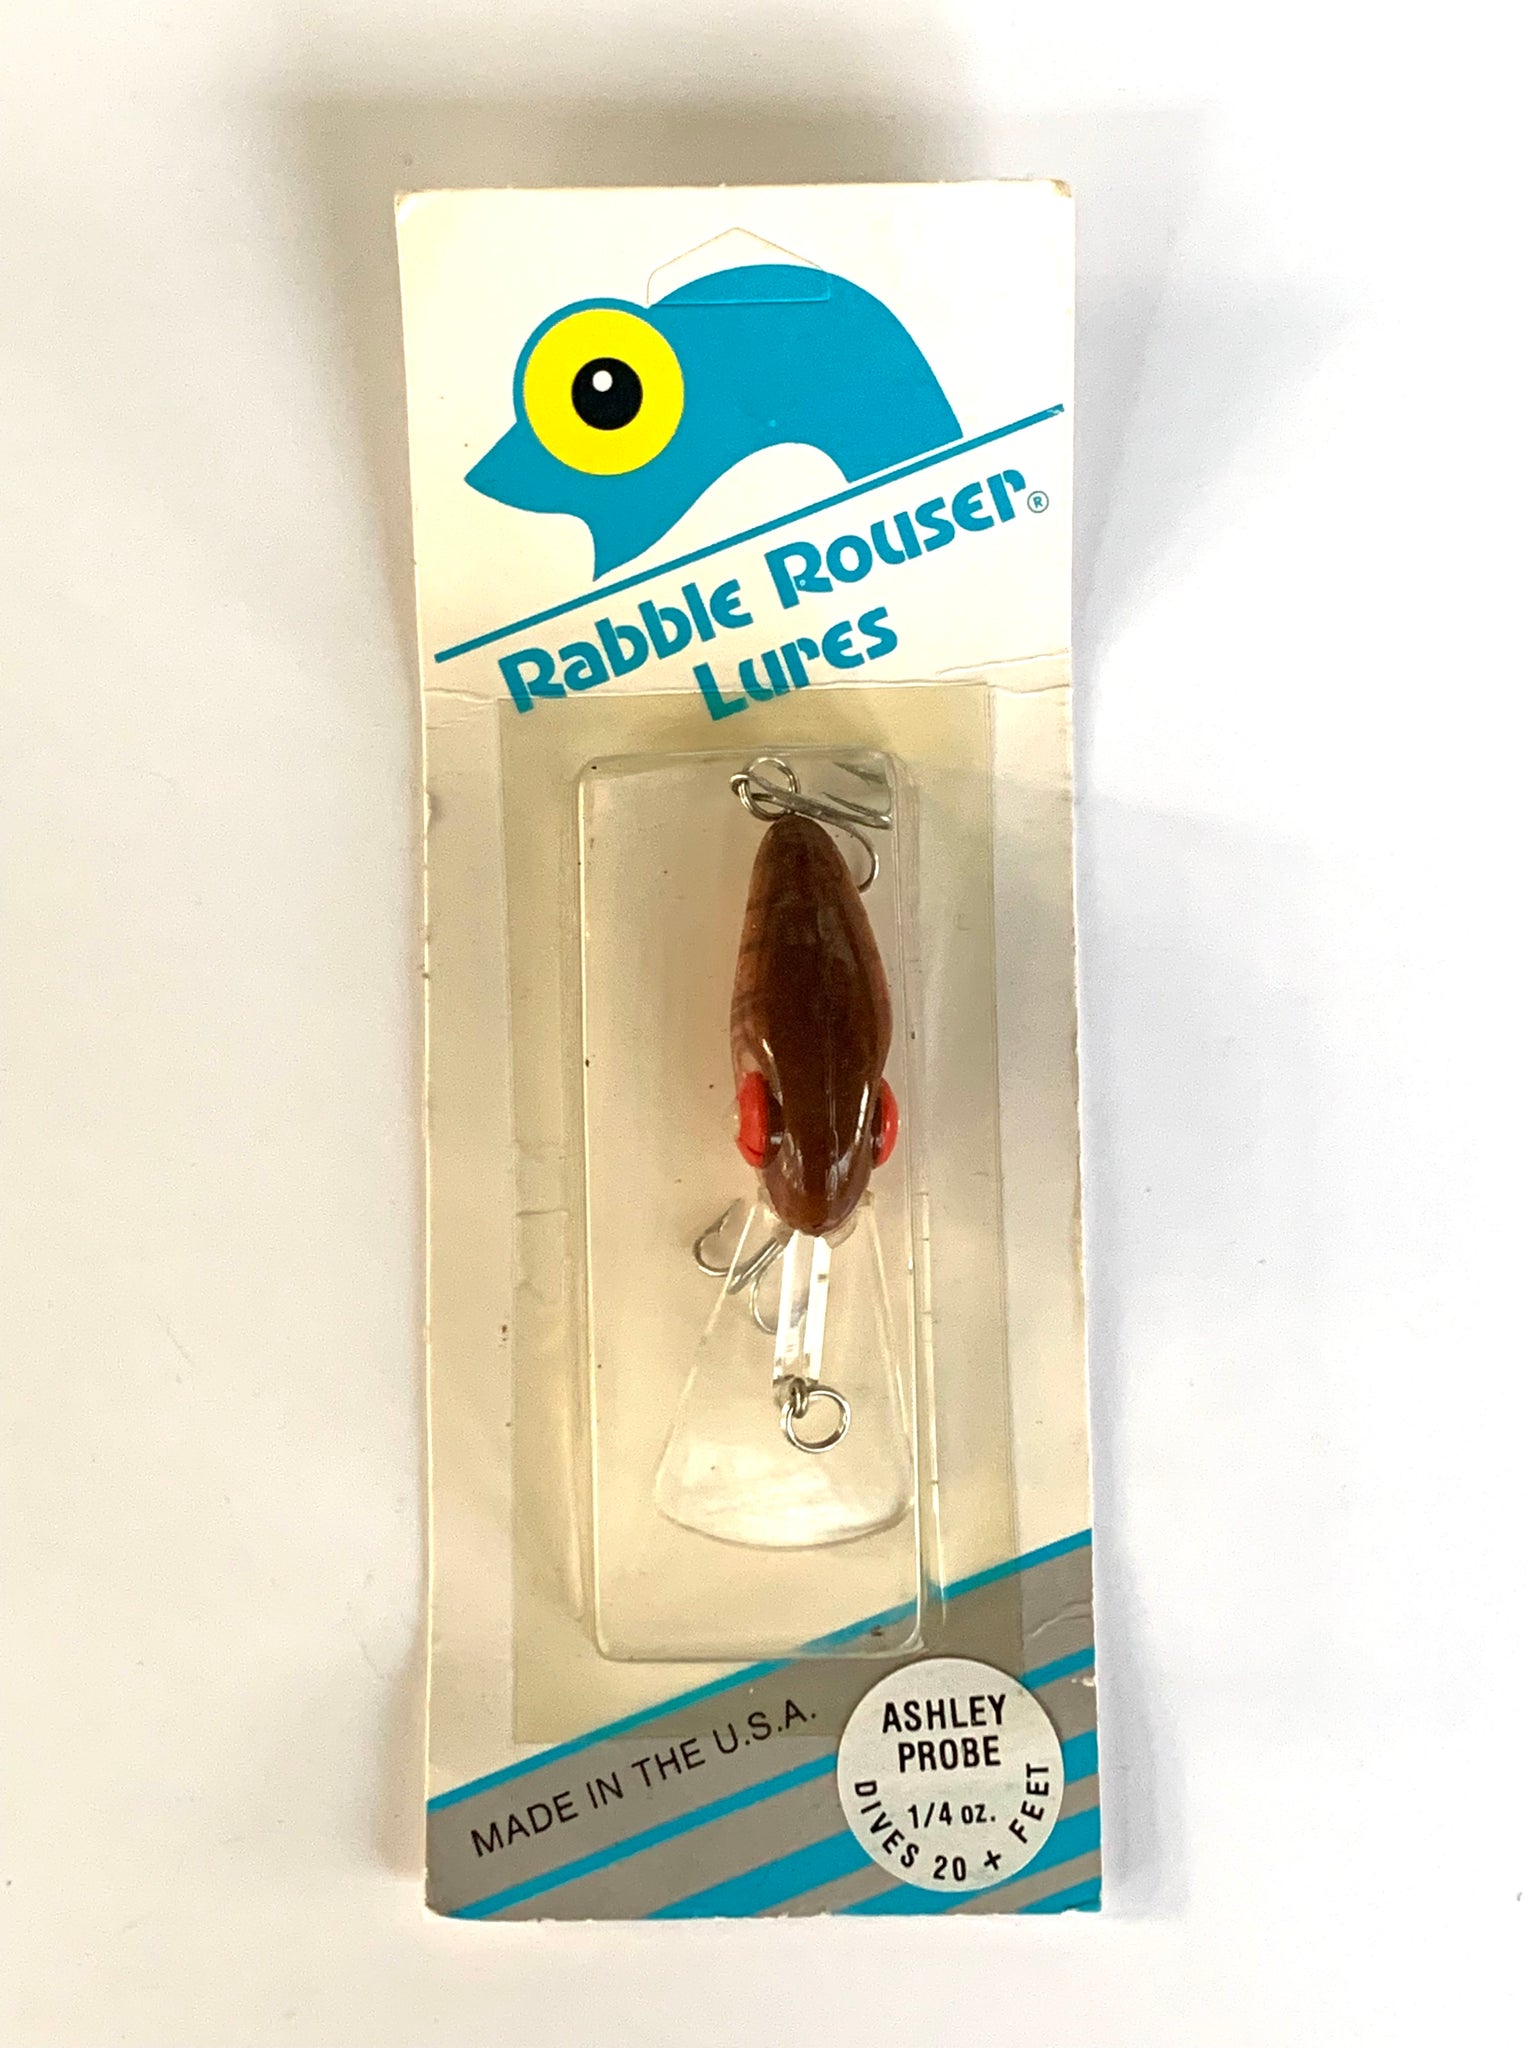 RABBLE ROUSER LURES ASHLEY PROBE Vintage Fishing Lure — CRAWDAD or